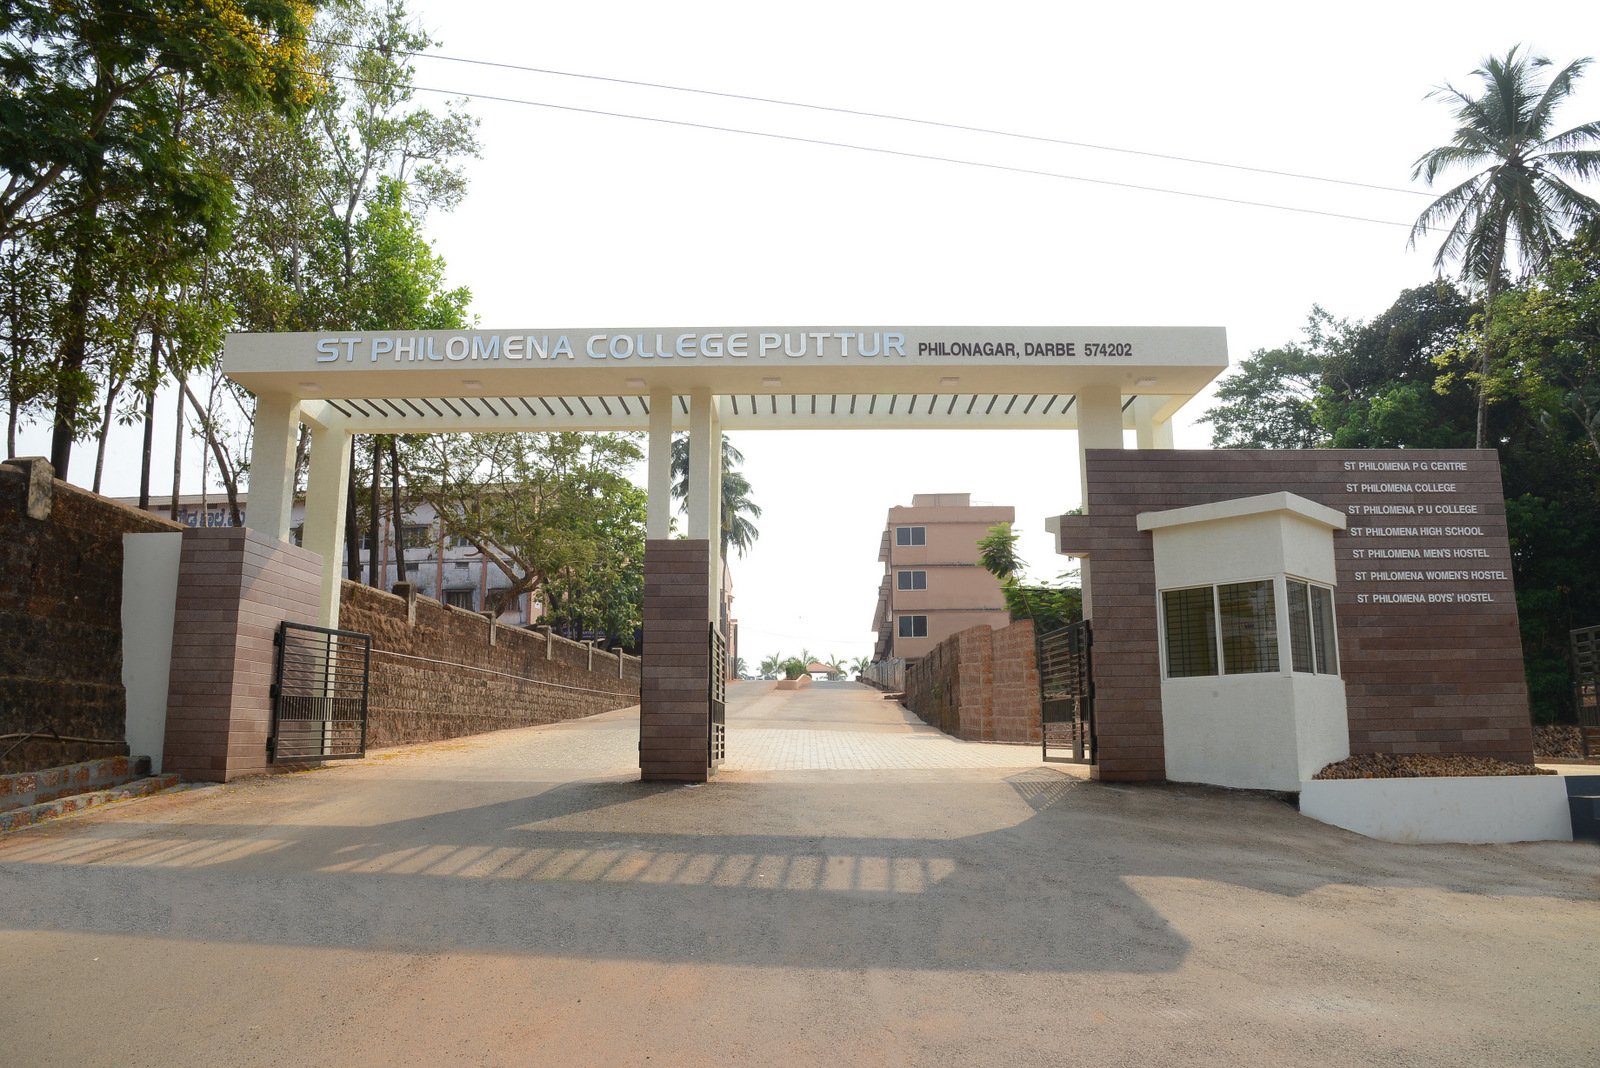 St Philomena College Puttur Gets Swachh Campus Recognition from MHRD